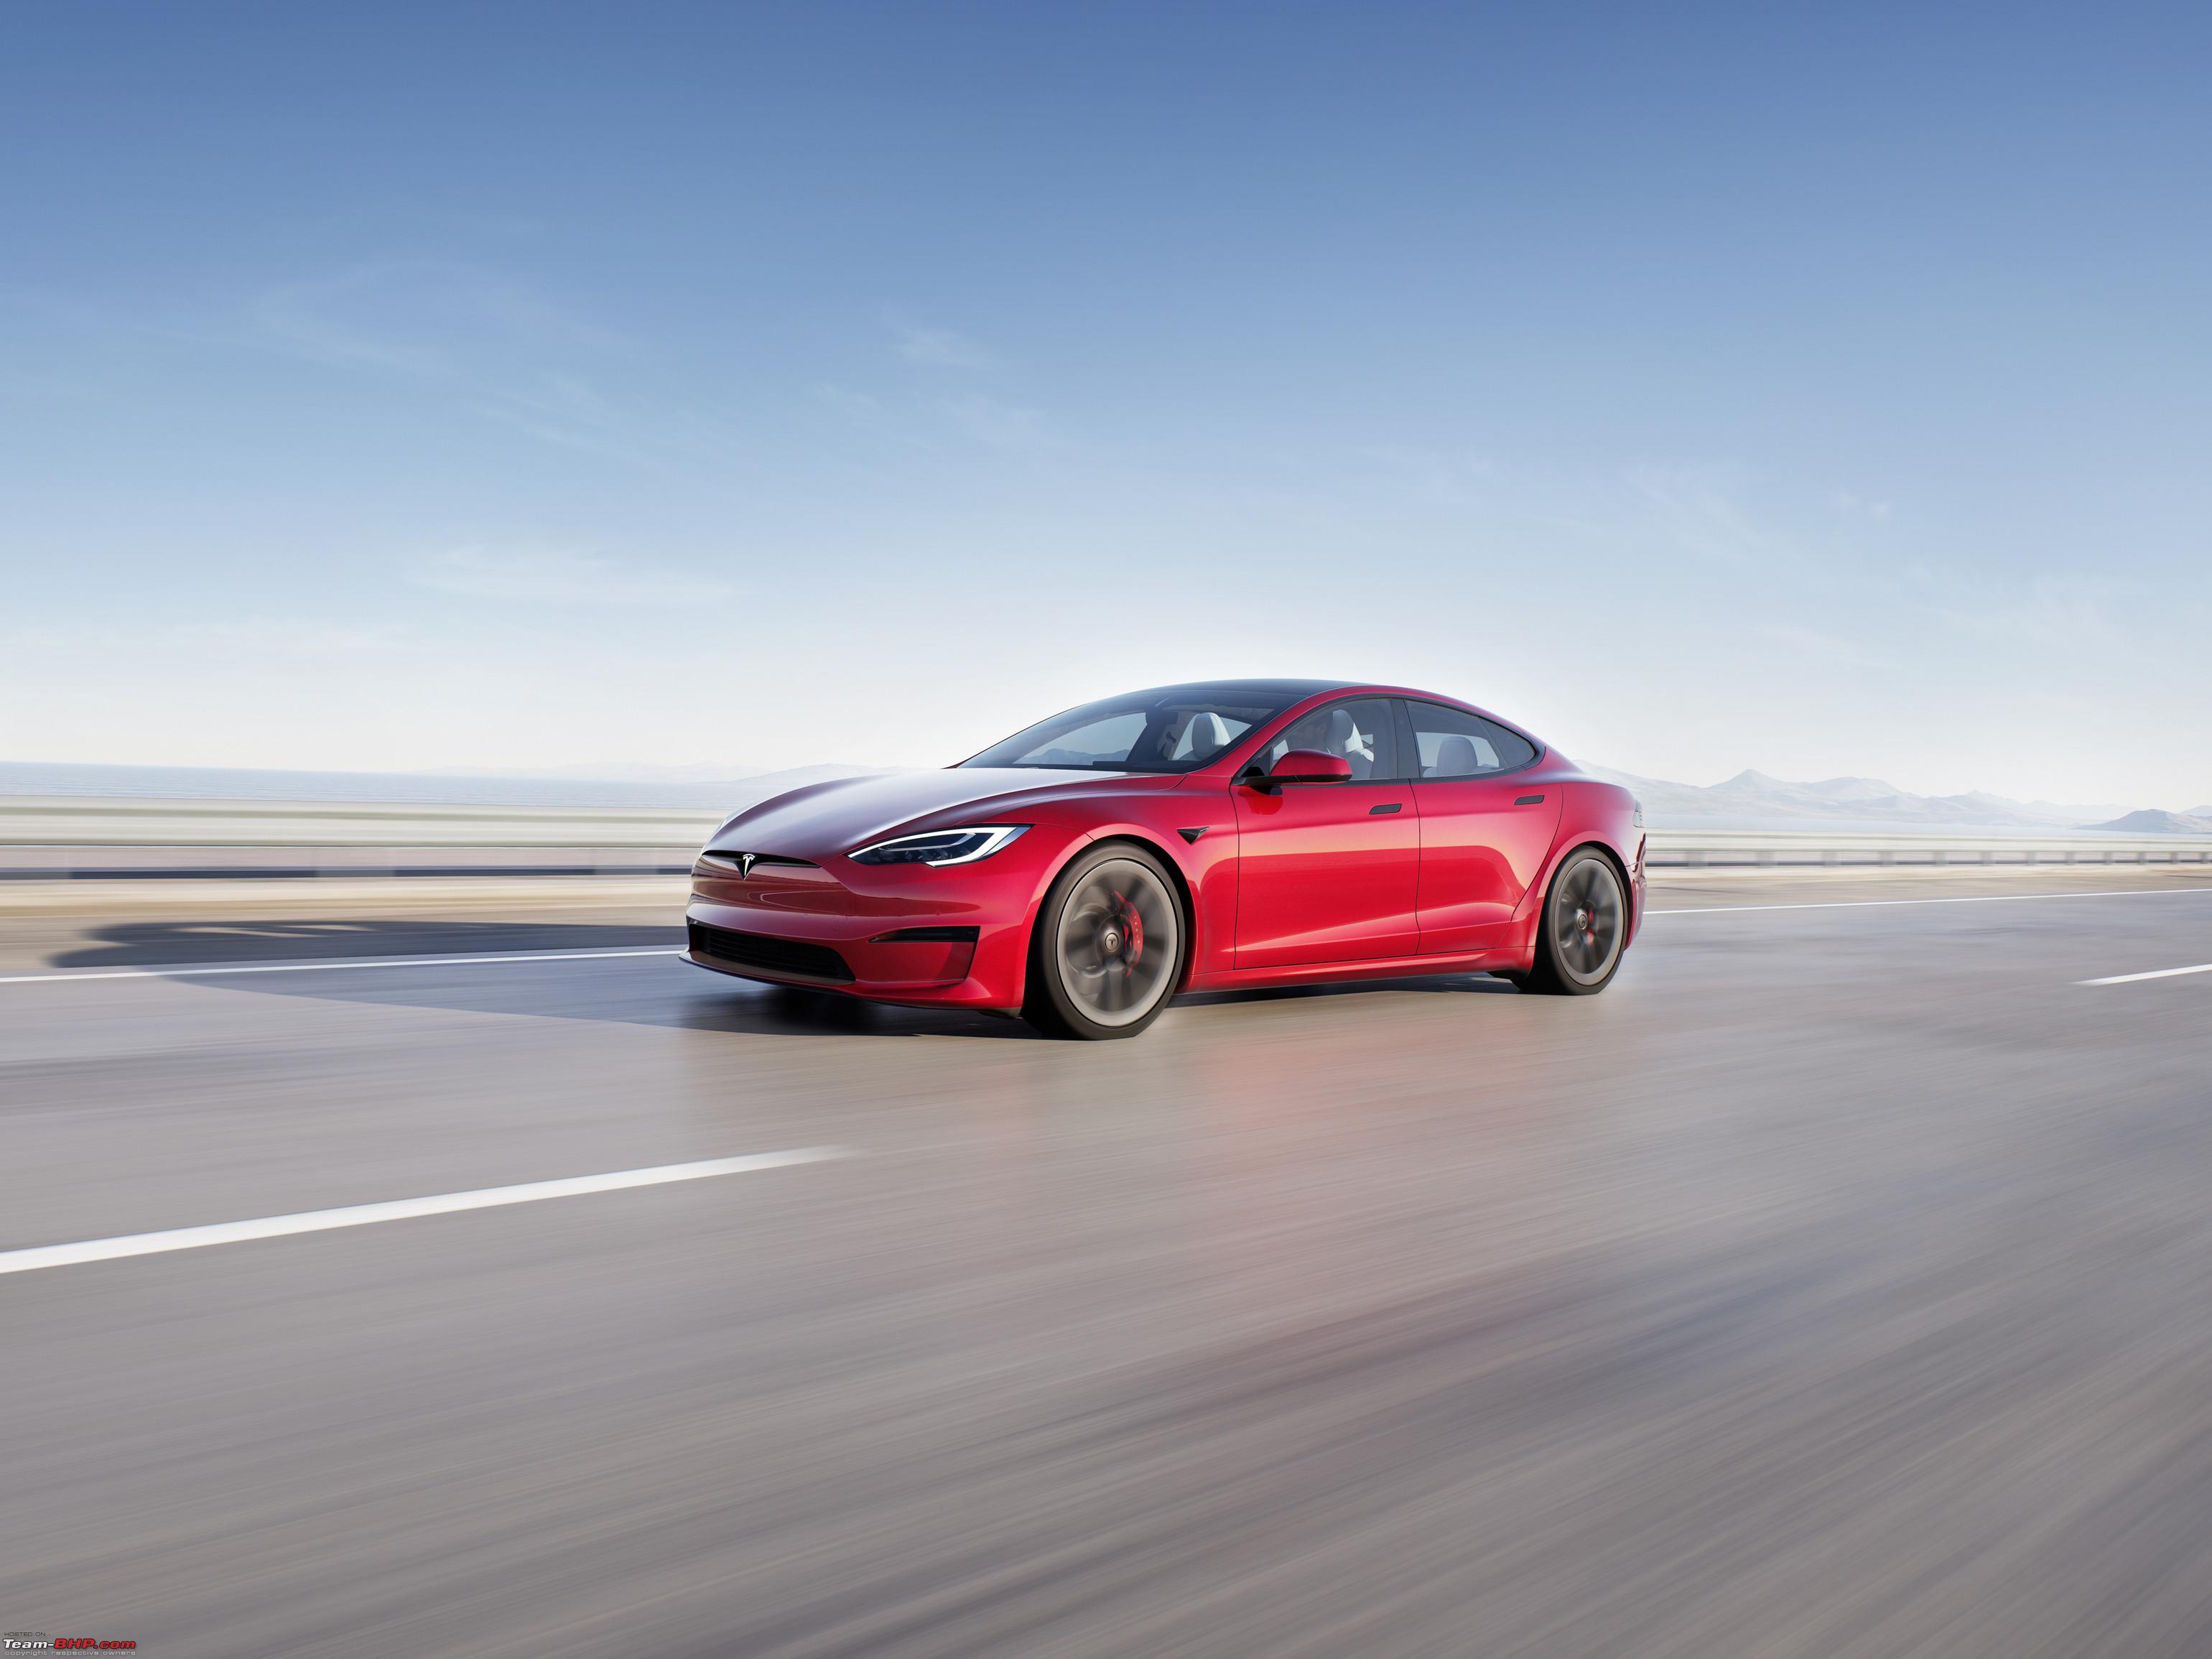 Tesla Model S Plaid sets new 1/4 mile record of 9.2 seconds, confirmed by  Jay Leno - Team-BHP